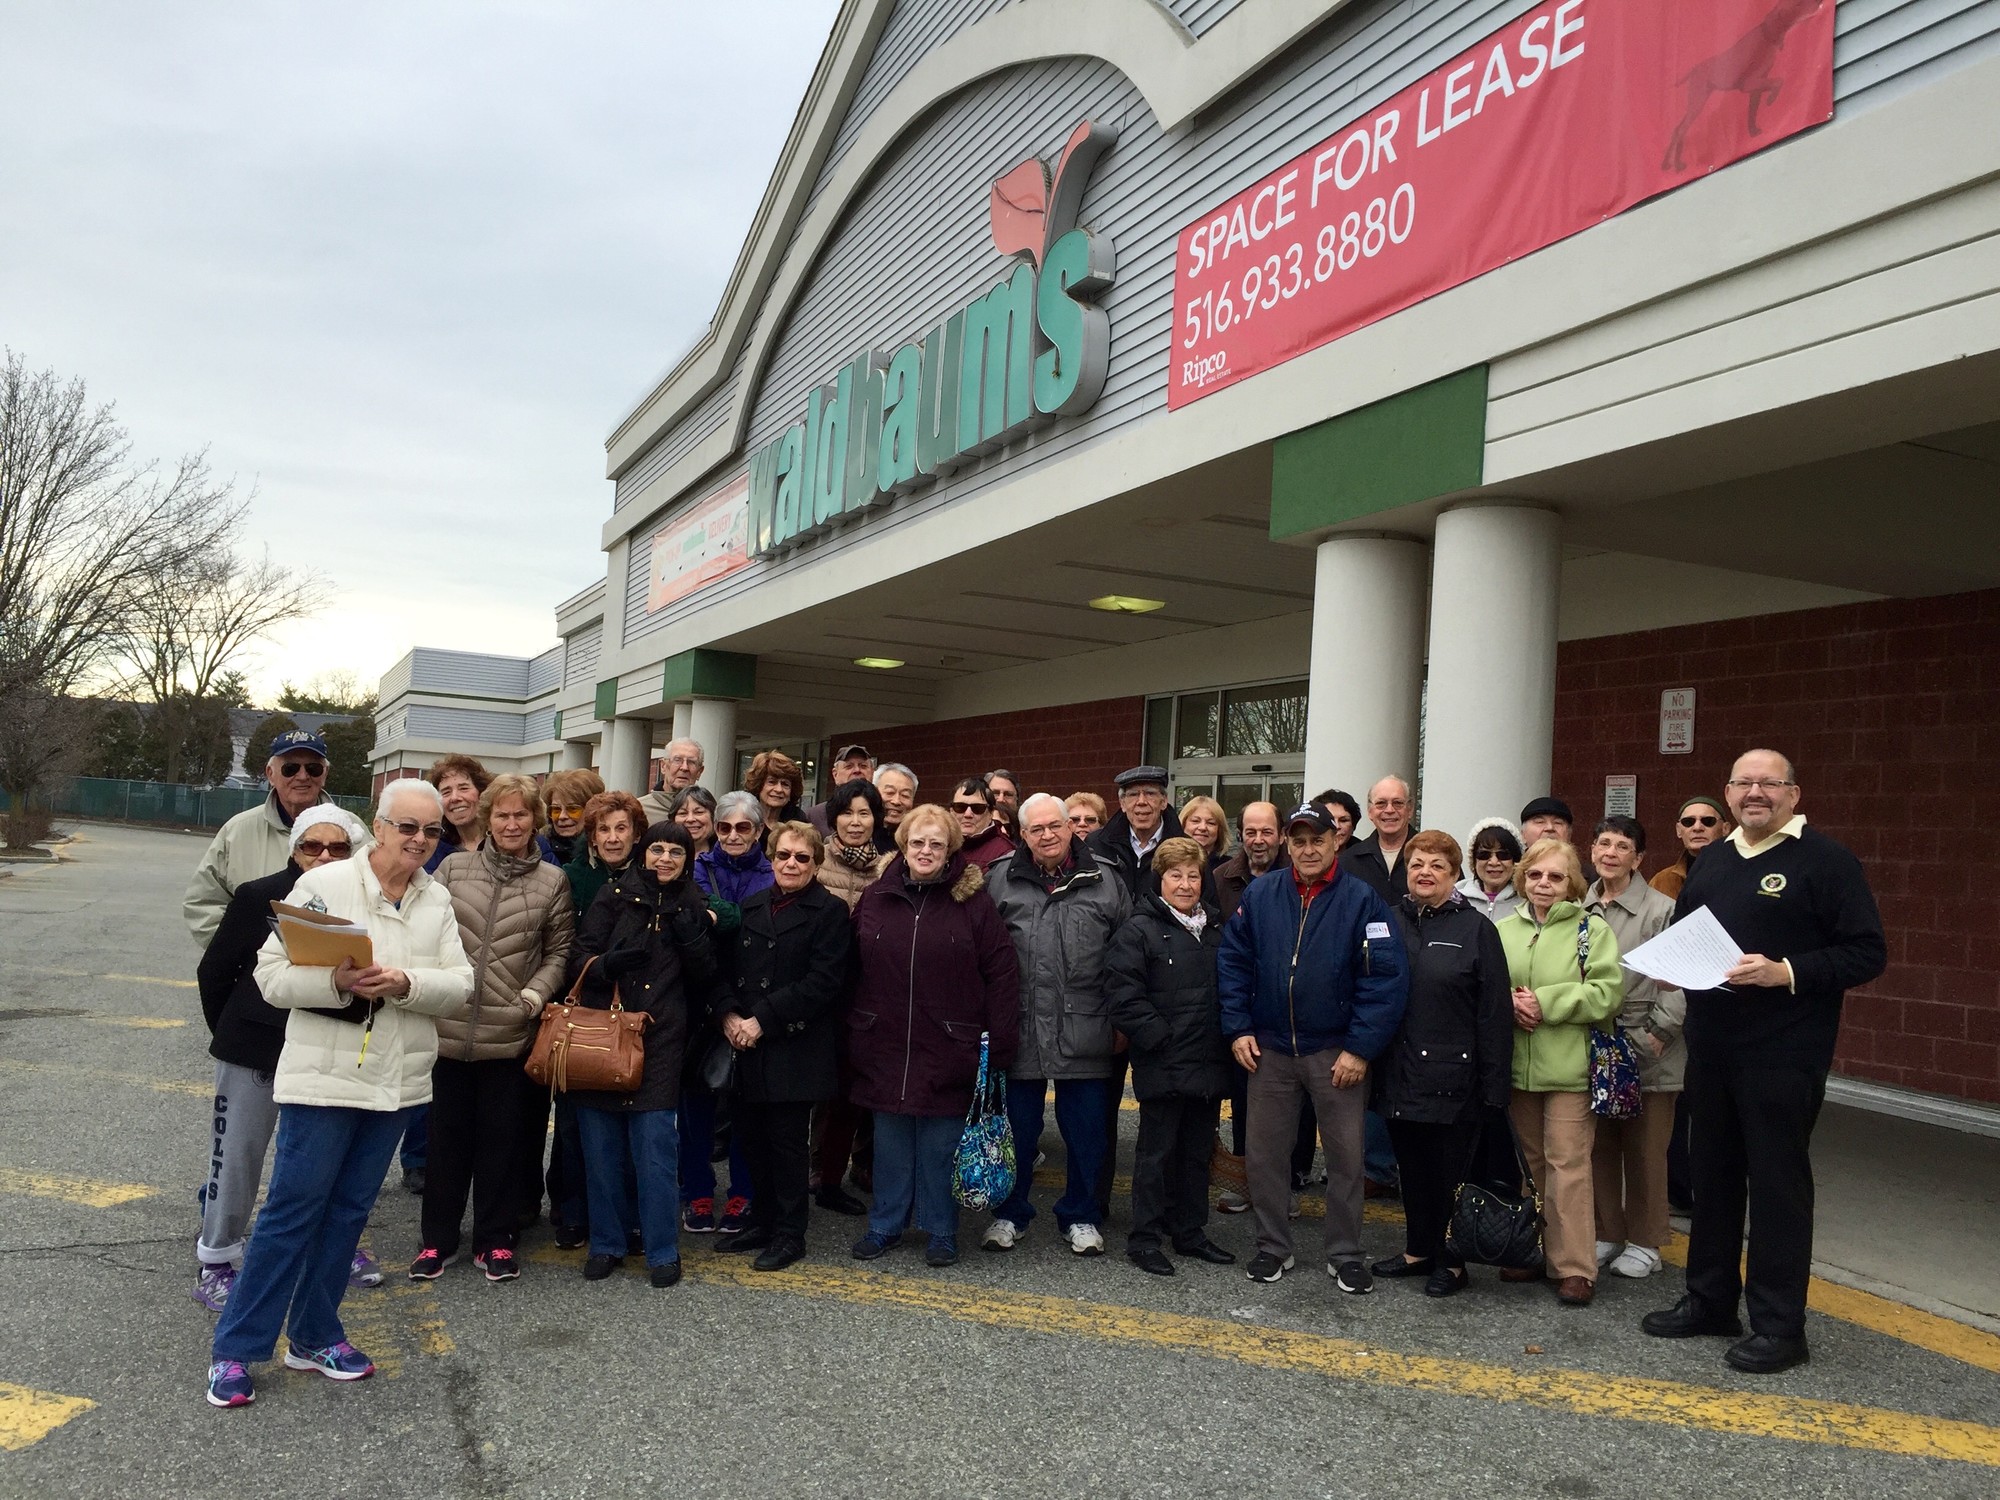 More than two dozen seniors met Hudes on Monday morning at the store, which closed in November.